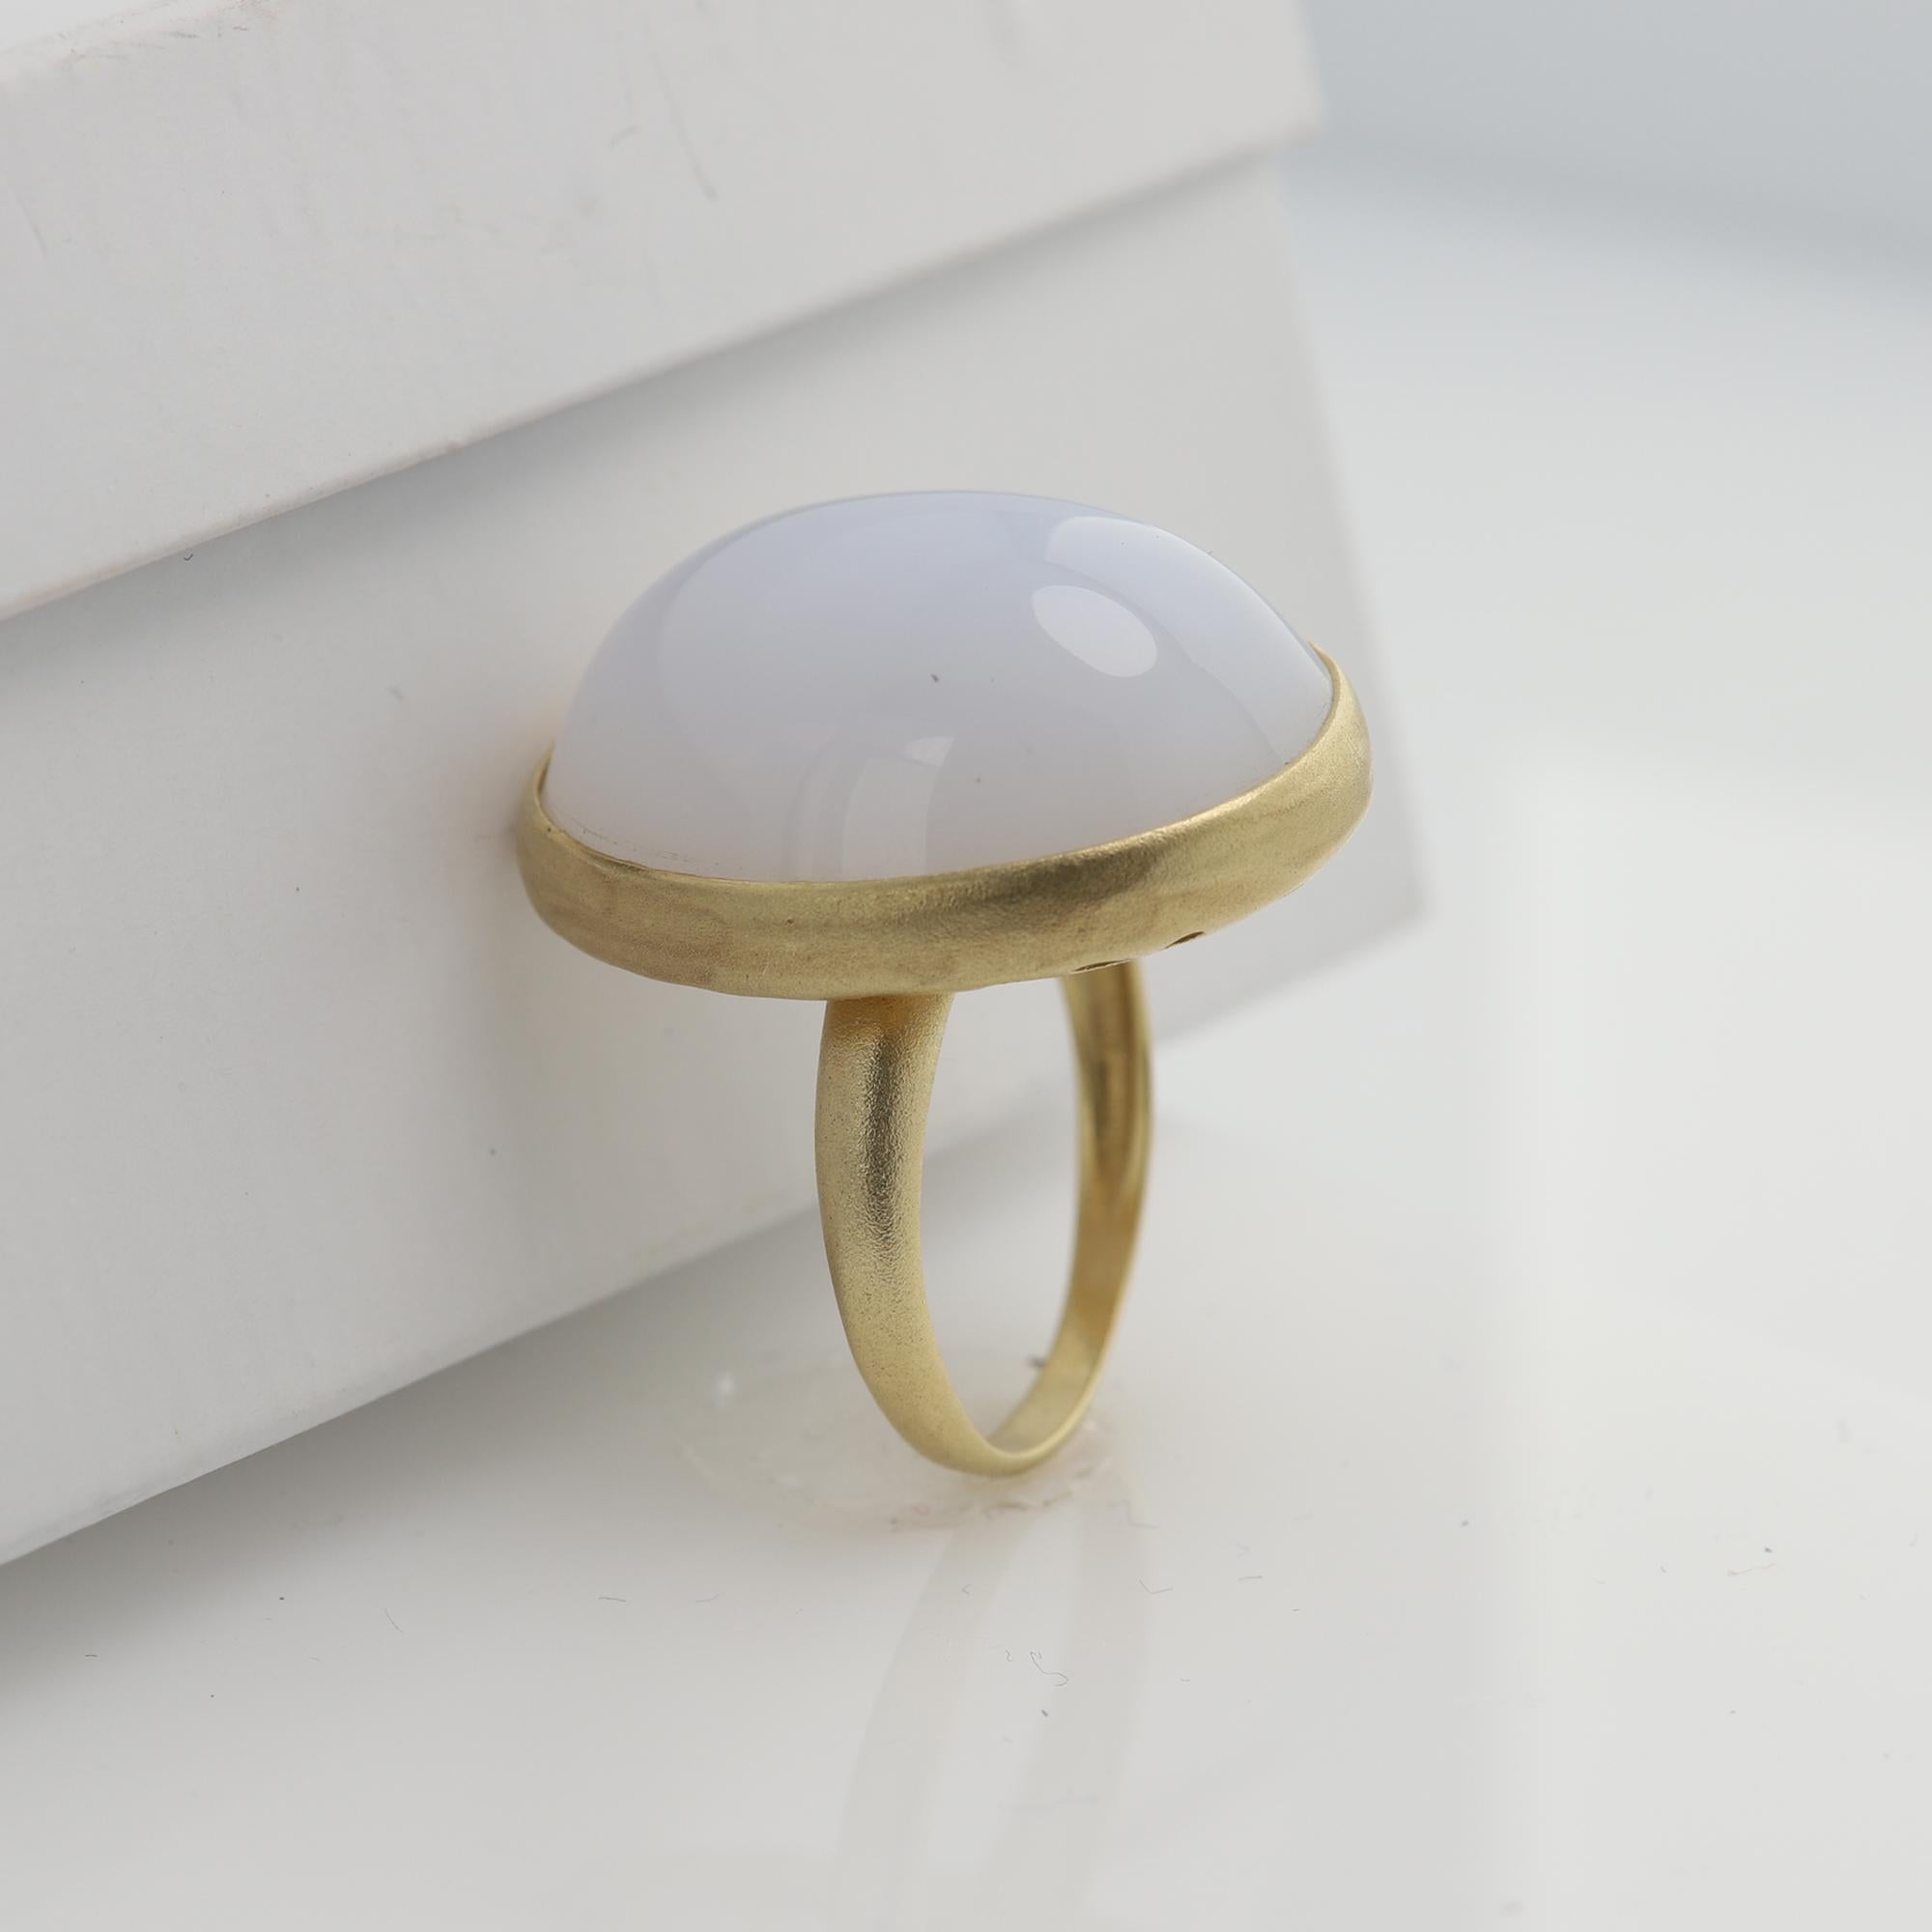 Cabochon Vintage Chalcedony Cocktail Ring Oval Cabuchon Dome 14k Yellow Gold #13 For Sale